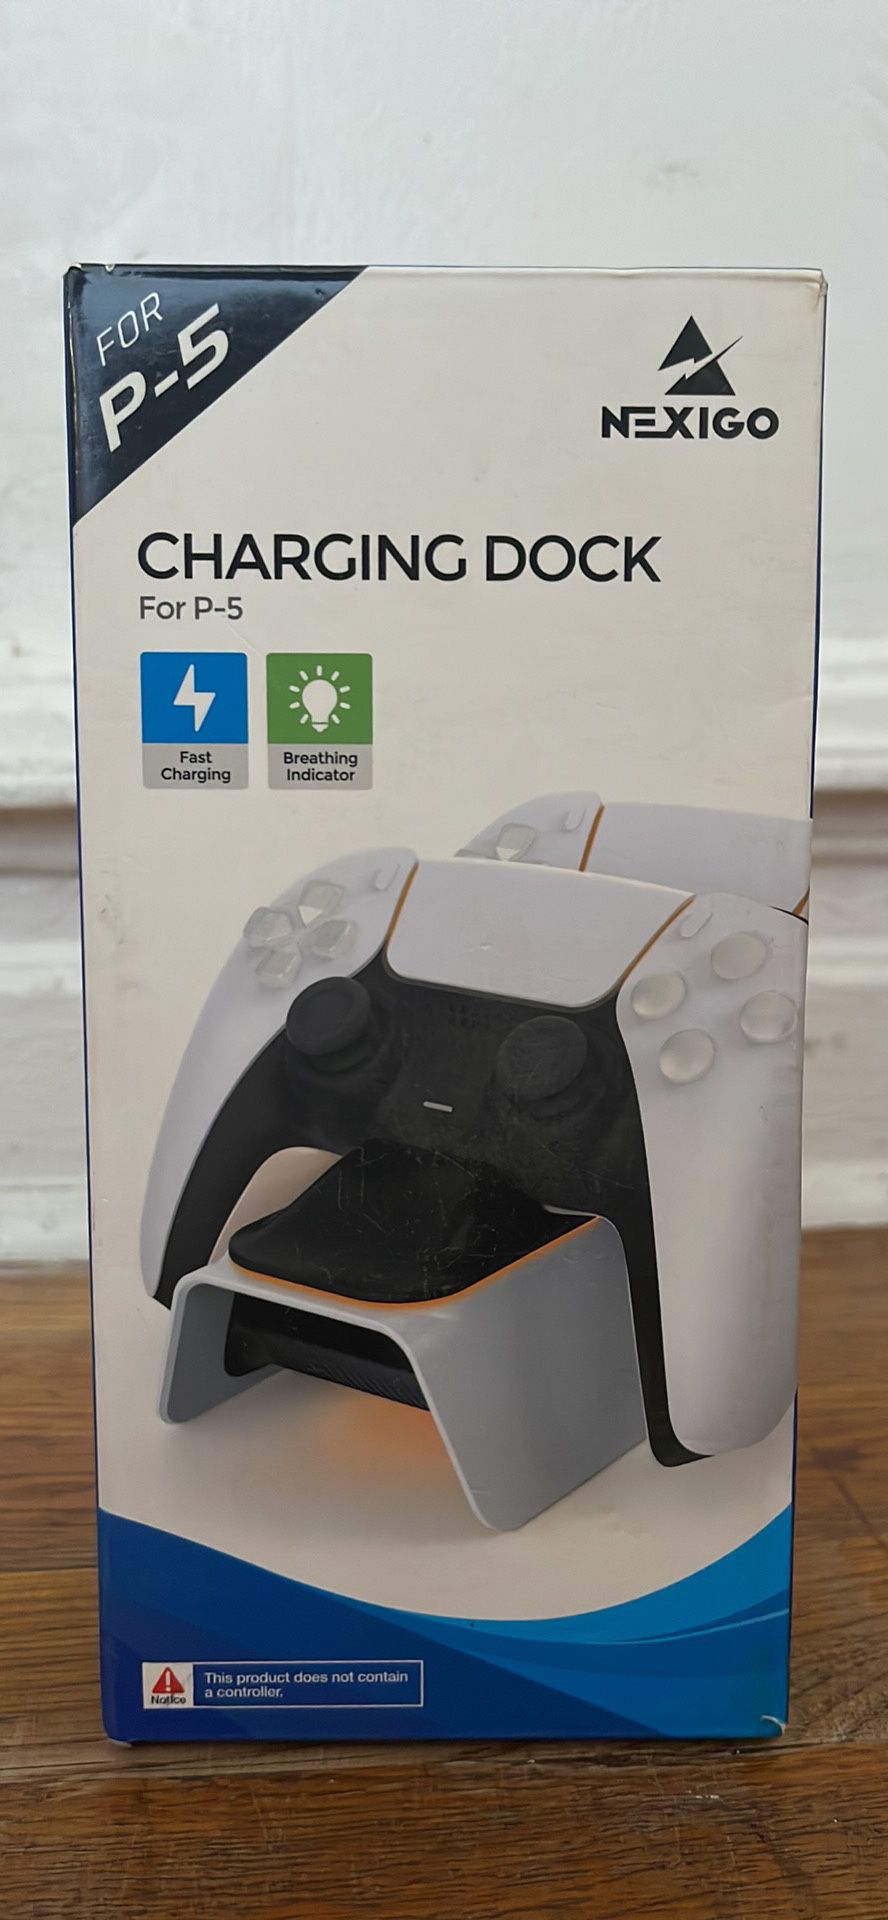 Ps5 Controller Charger Dock